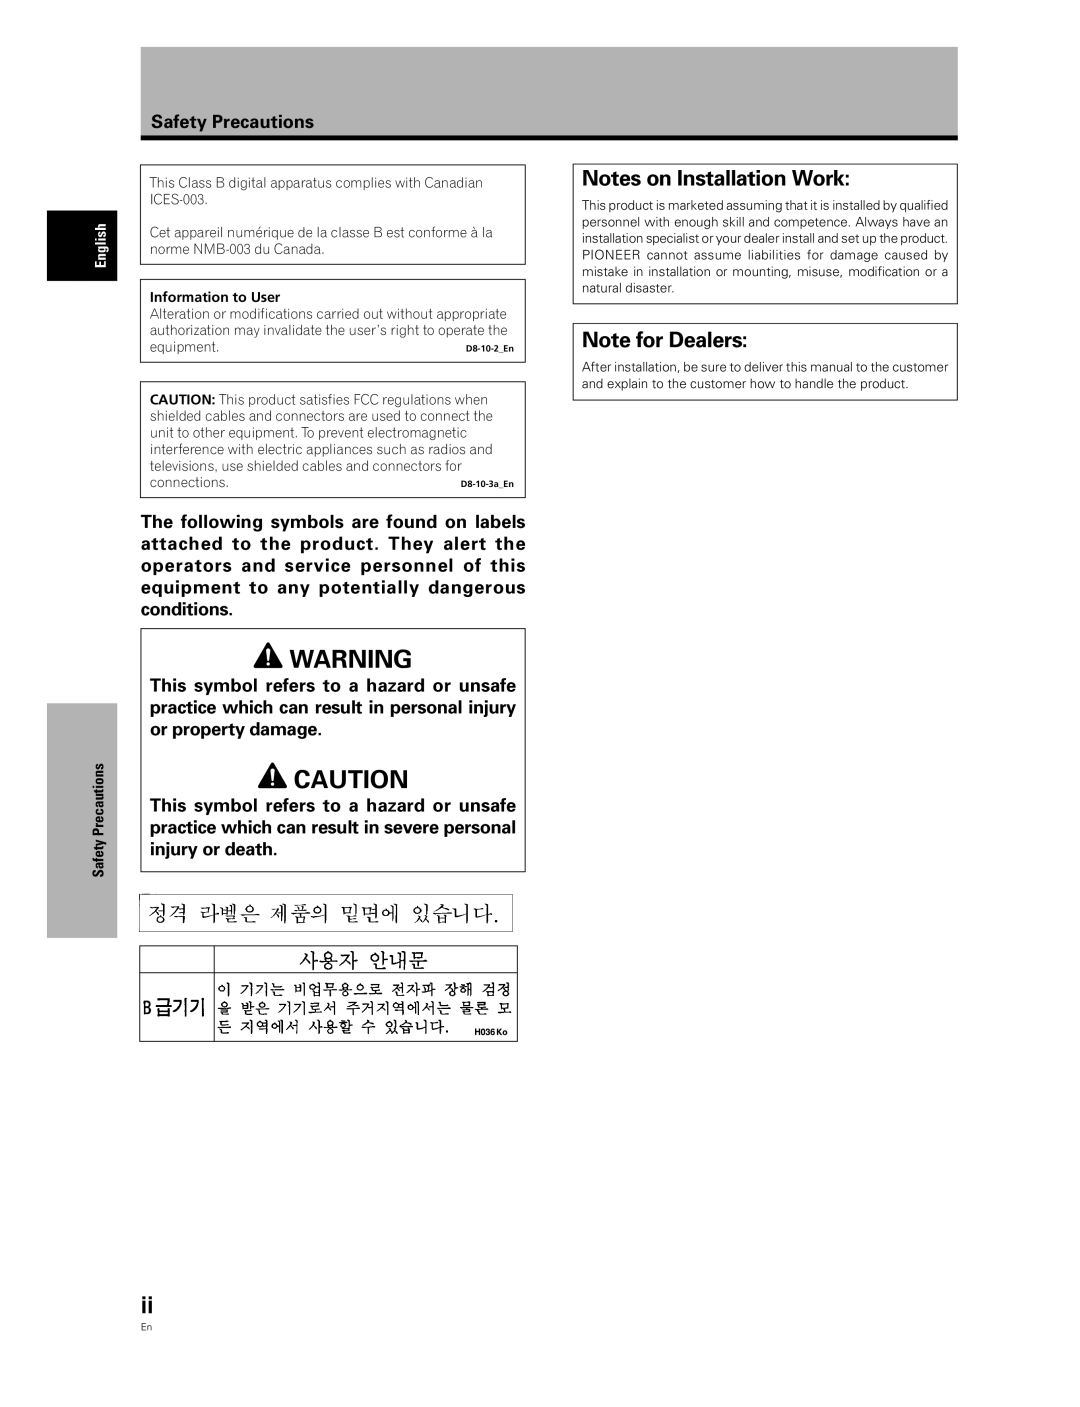 Pioneer PDA-5004, PDA-5003 manual Notes on Installation Work, Note for Dealers 